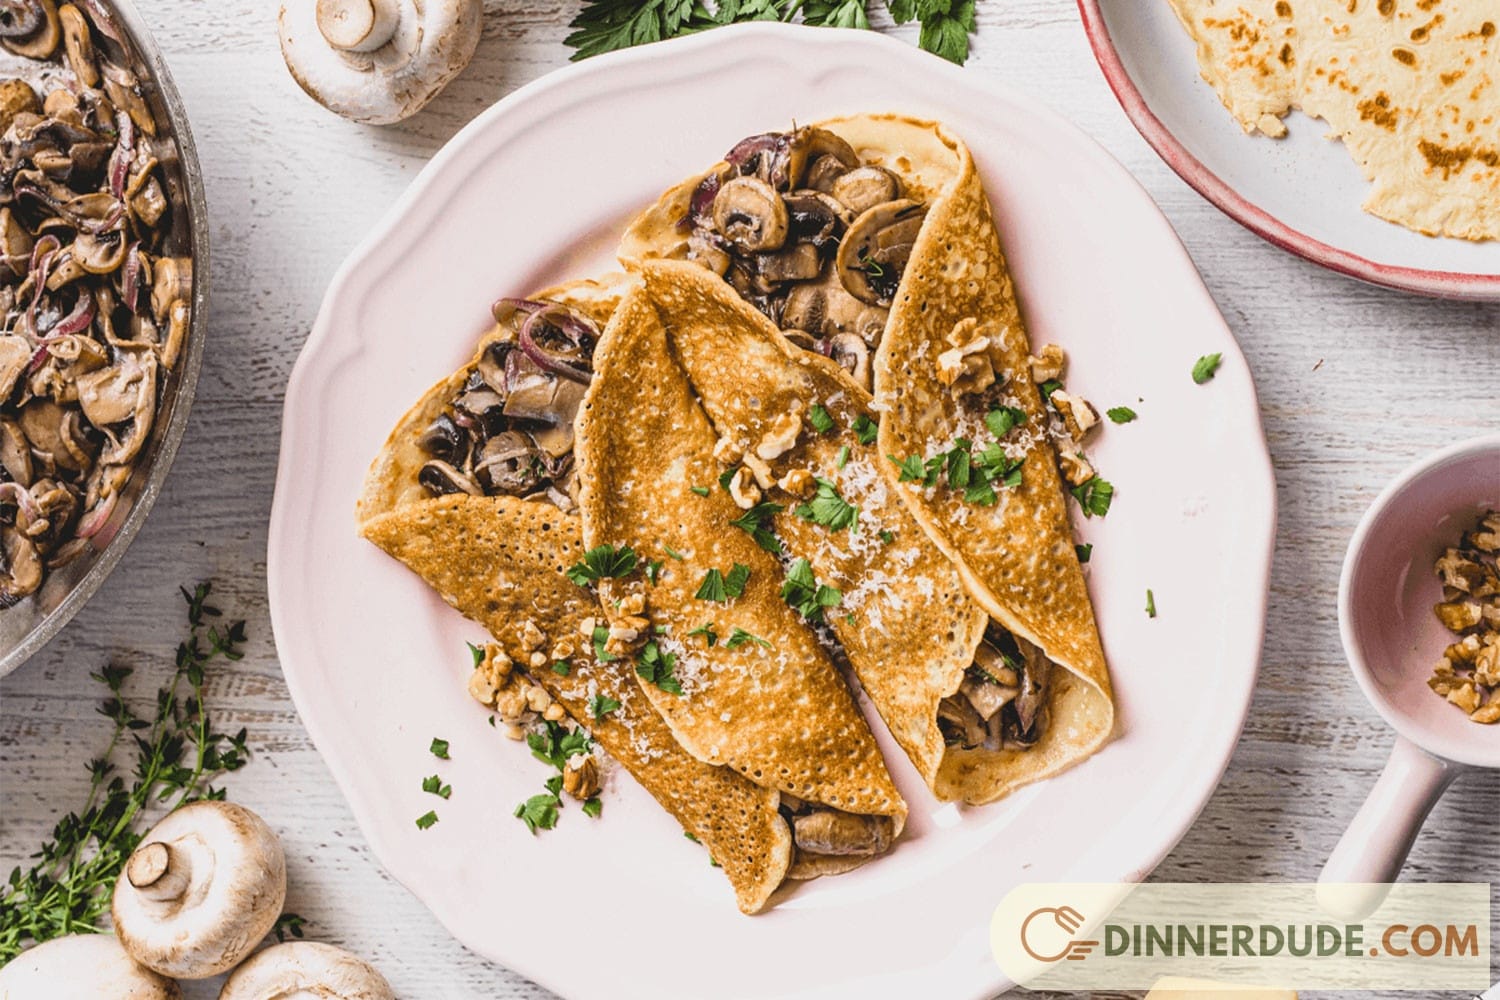 CHESTNUT CREPES WITH PUMPKIN AND MUSHROOMS